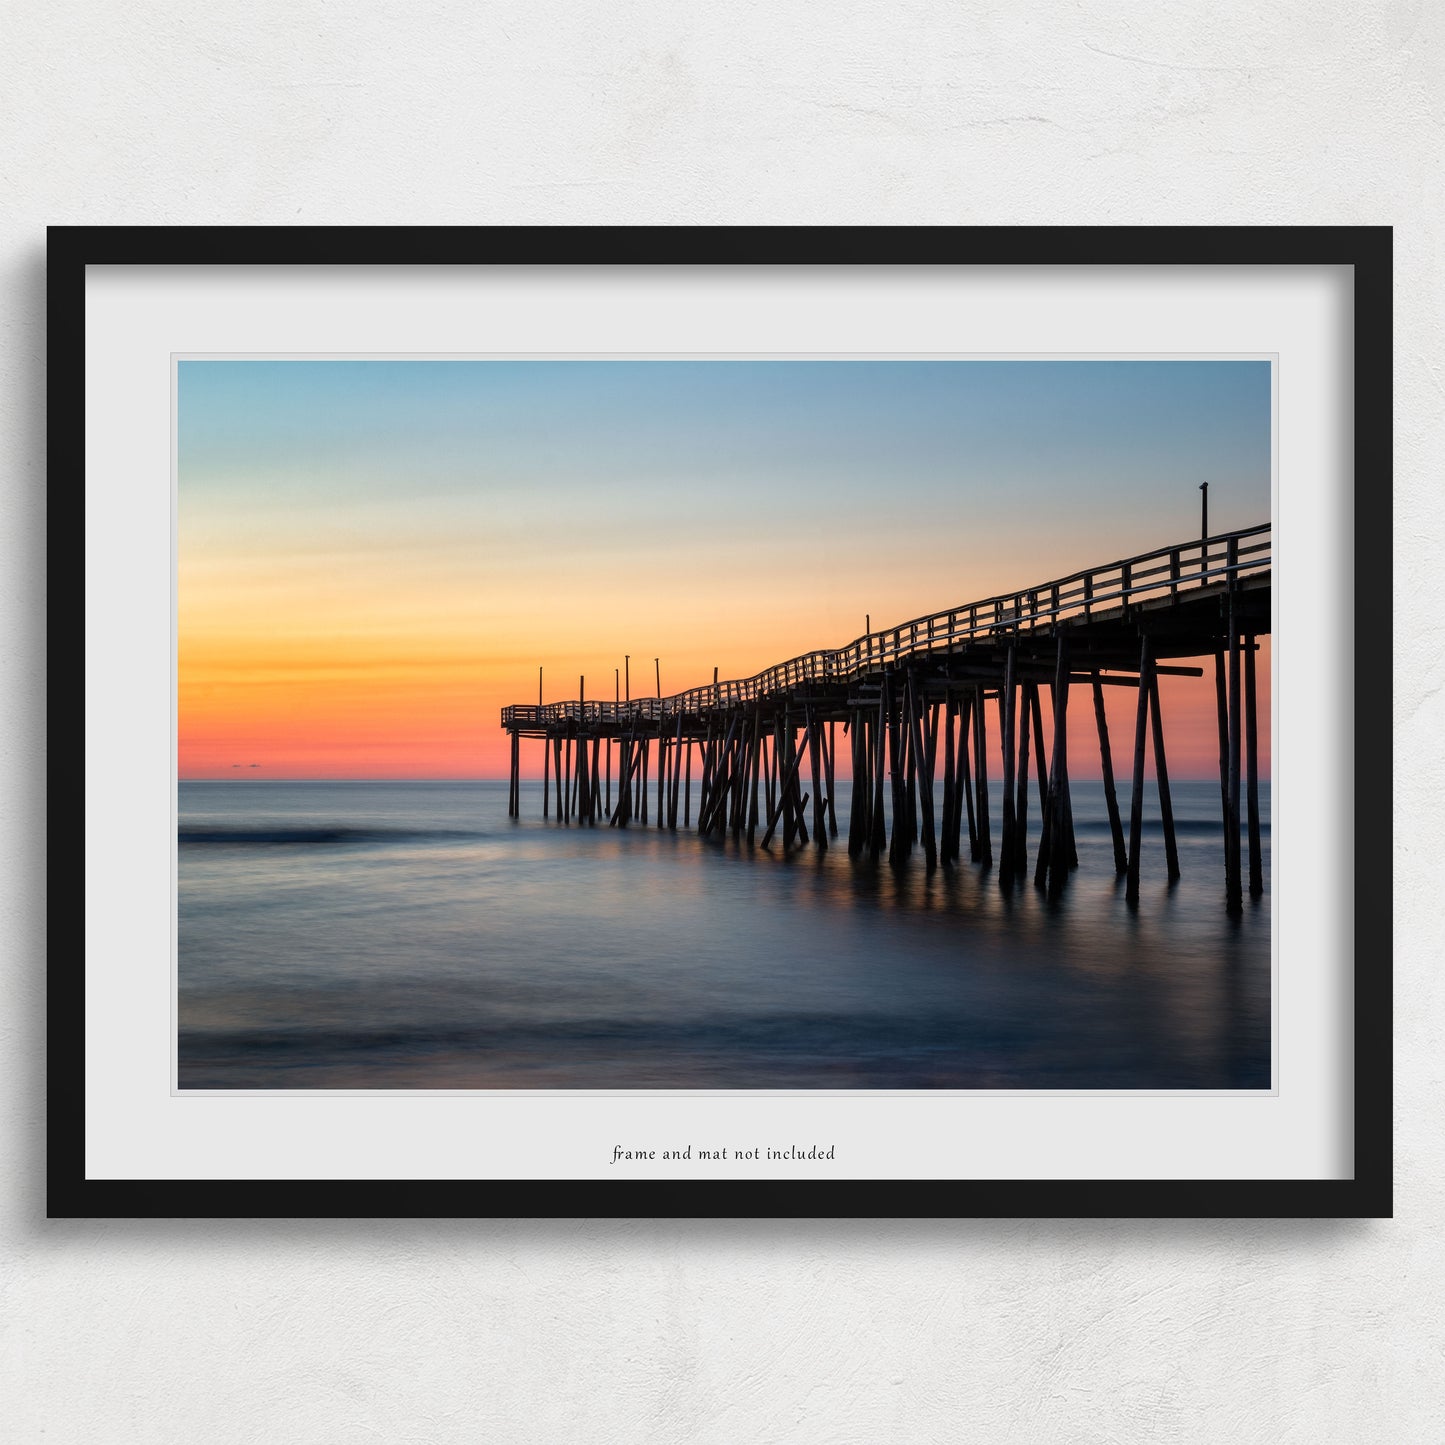 Image displaying a the wall art print within a thin black frame and white mat, meant to inspire potential display options. The actual product is the OBX print only; the frame and mat are not included with purchase.